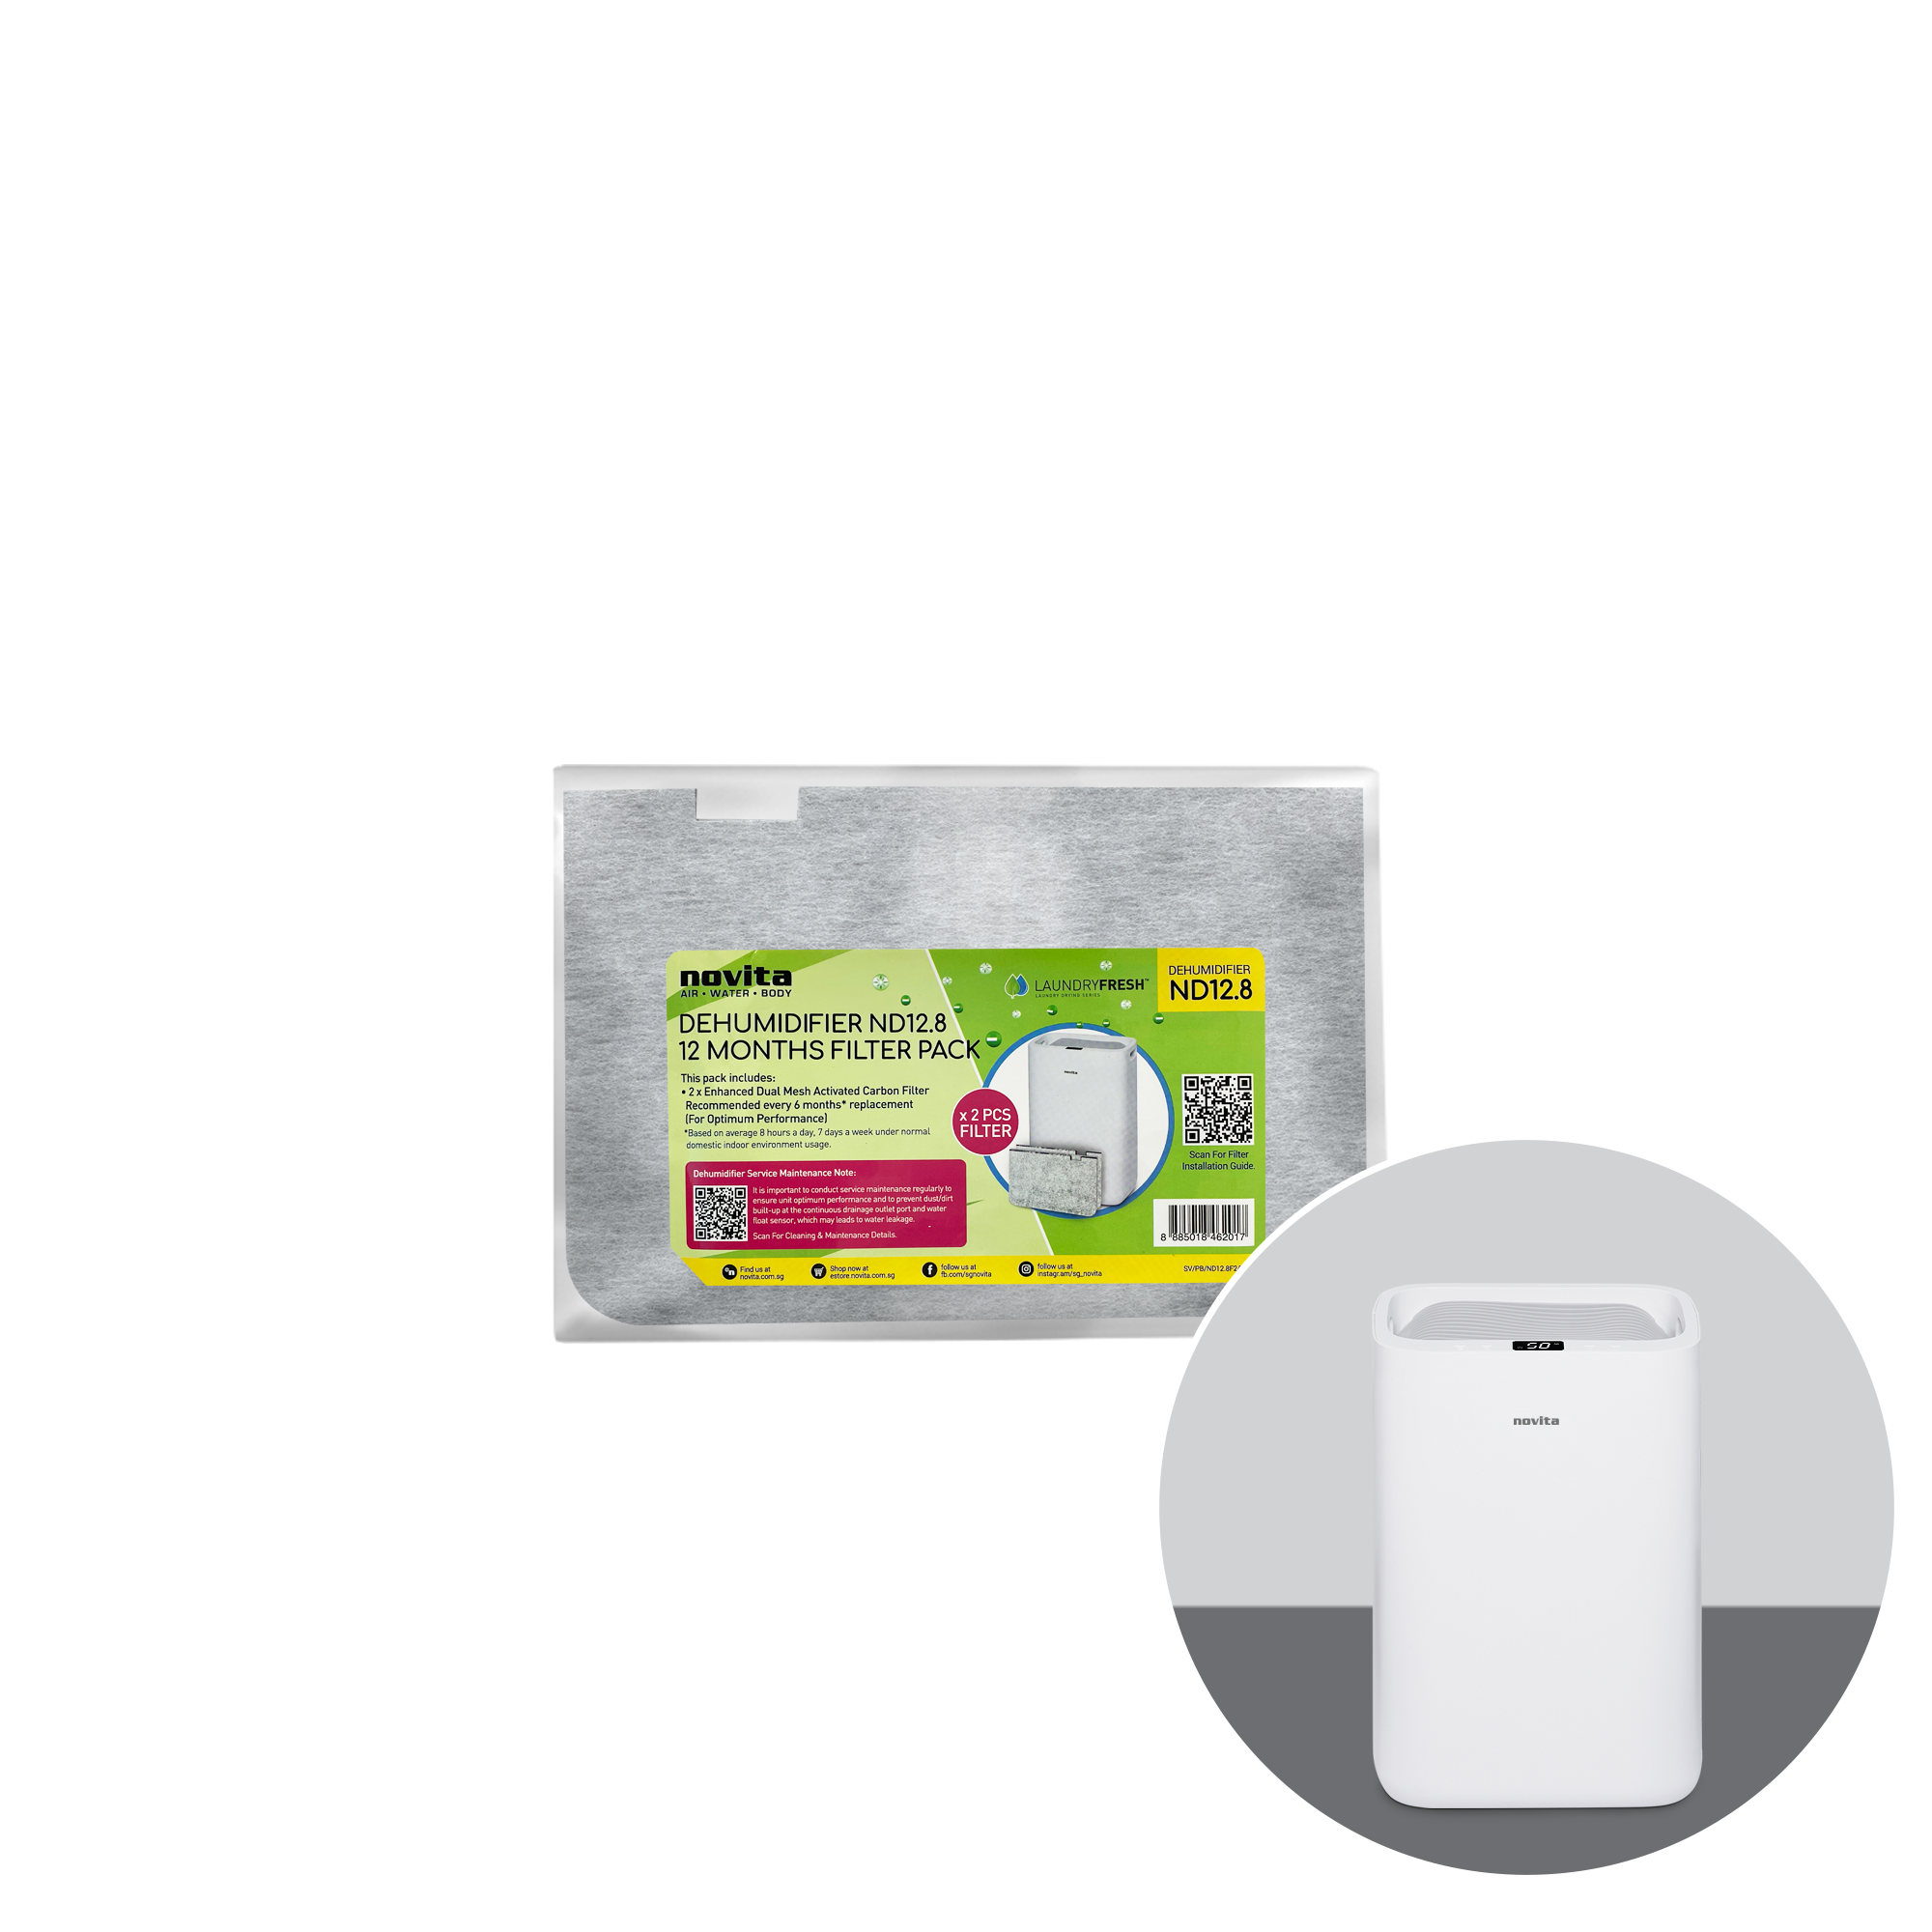 A white novita dehumidifier with a Filter Pack - For Dehumidifier ND12.8 (2 Pcs) bag next to it.